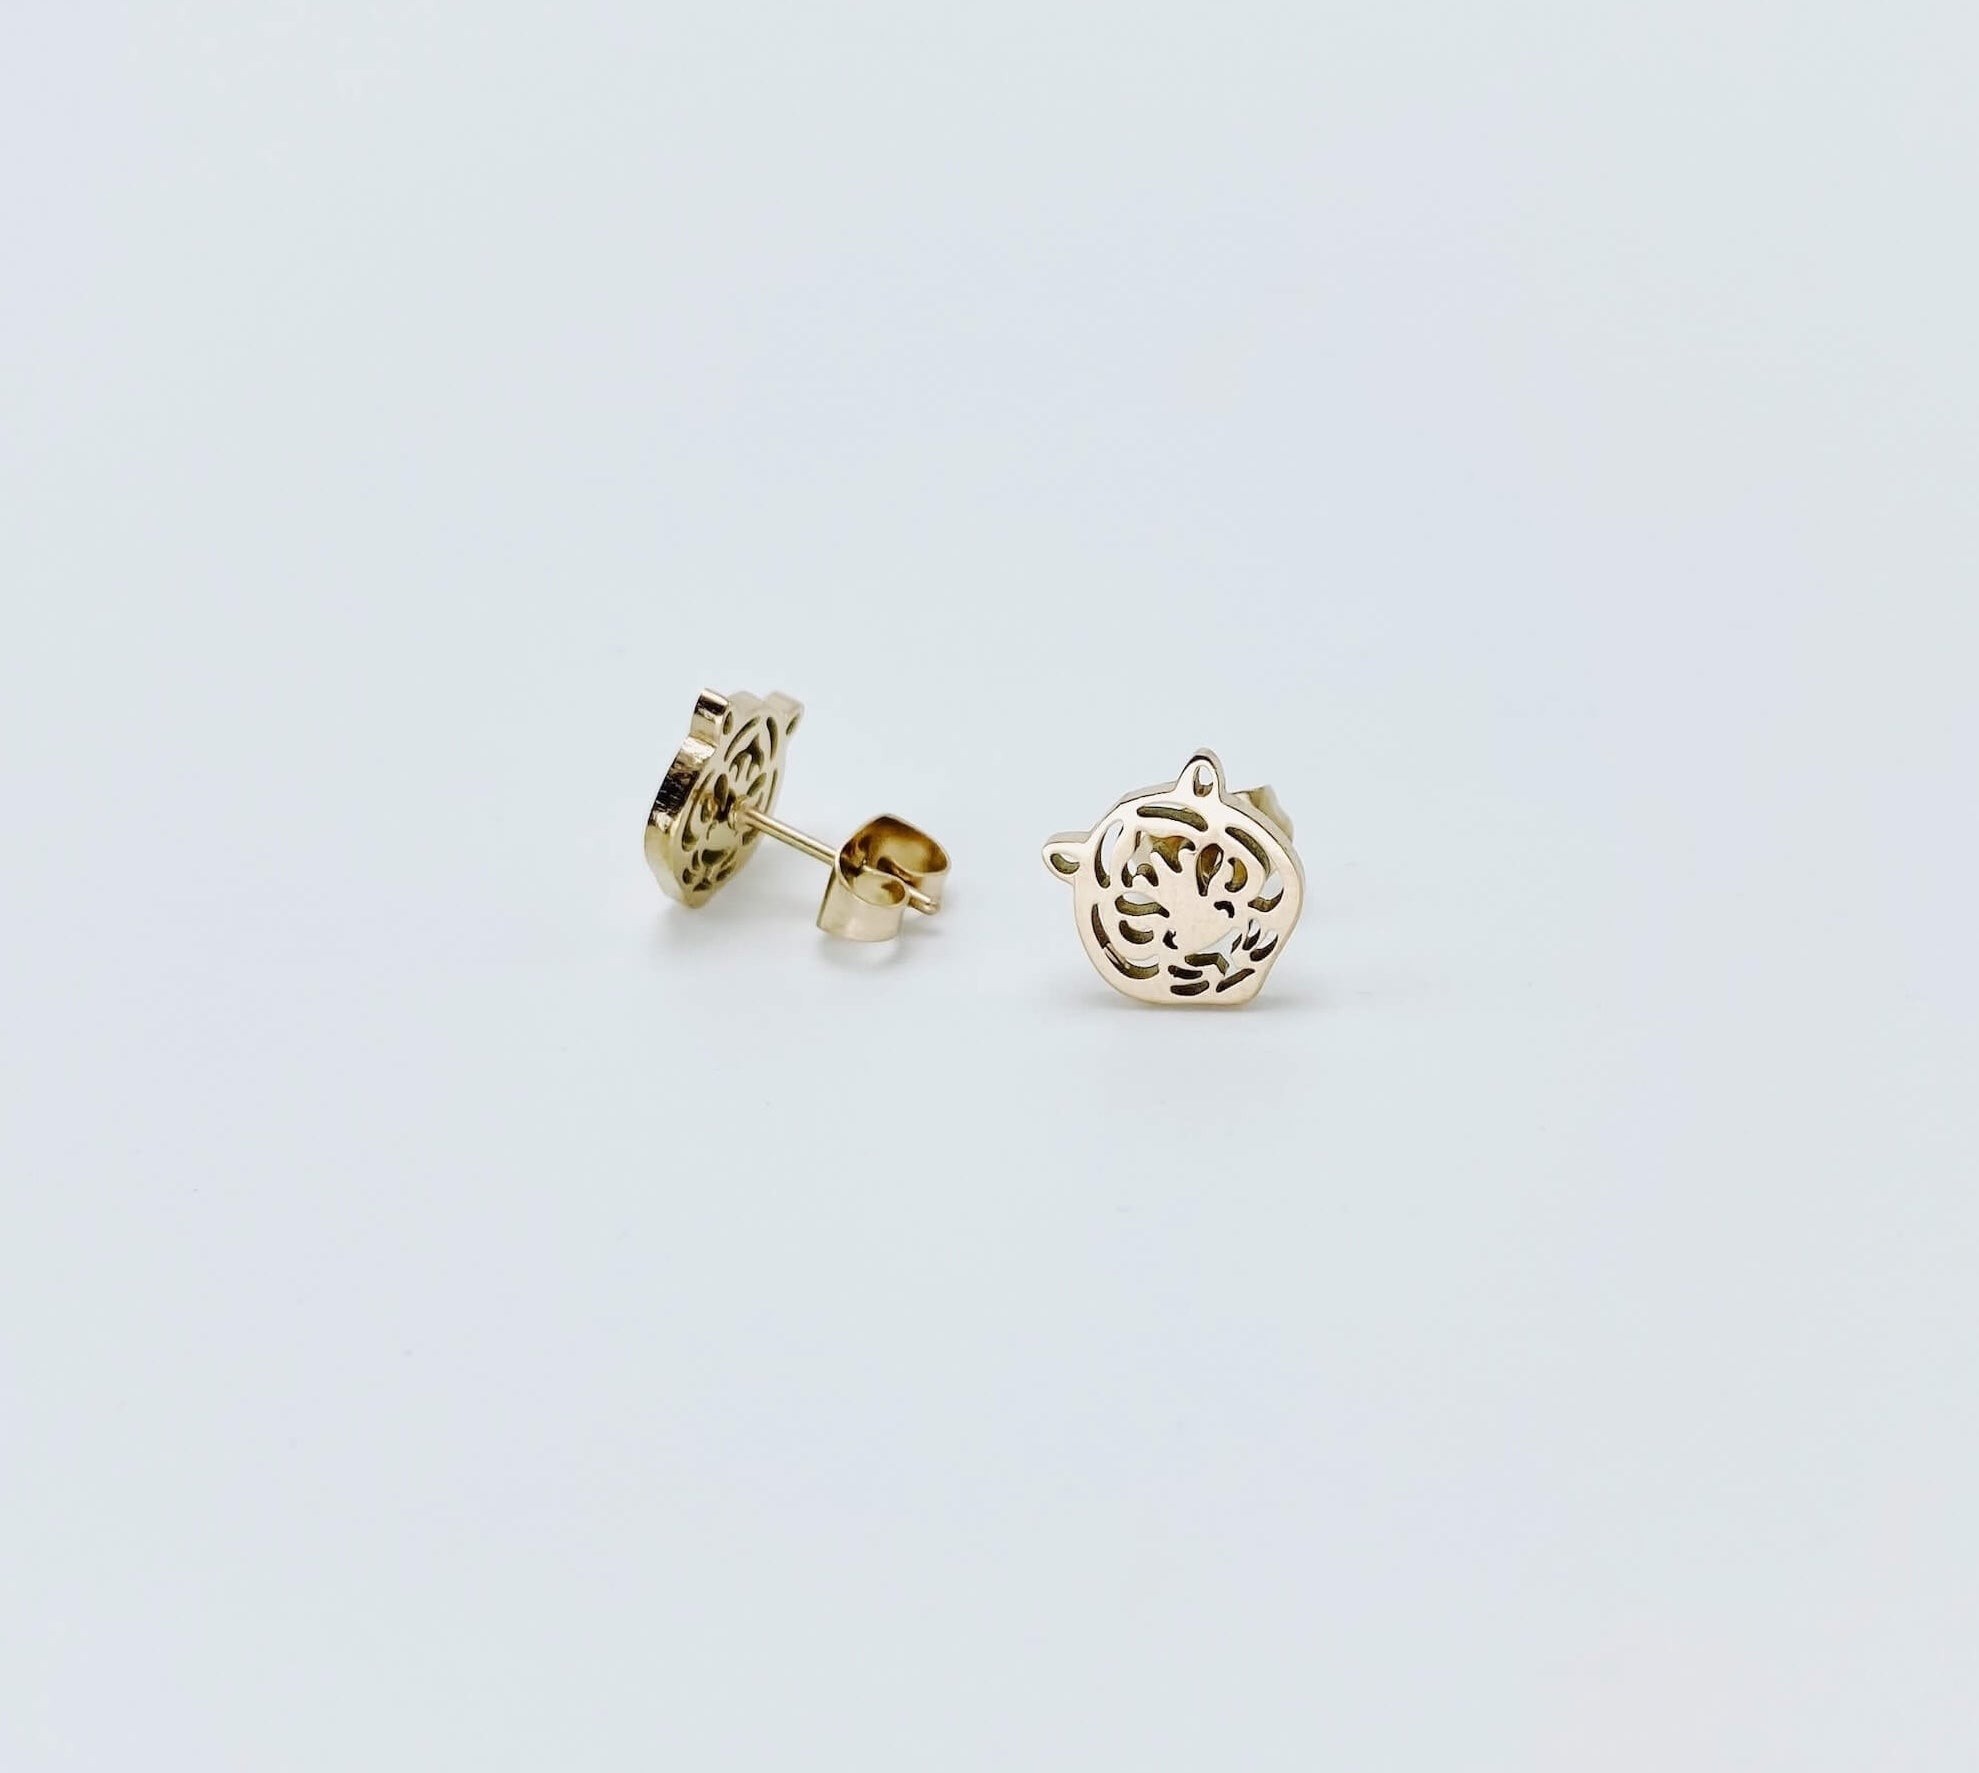 Metallic tiger stud earrings in a rose gold hue made from stainless steel. 